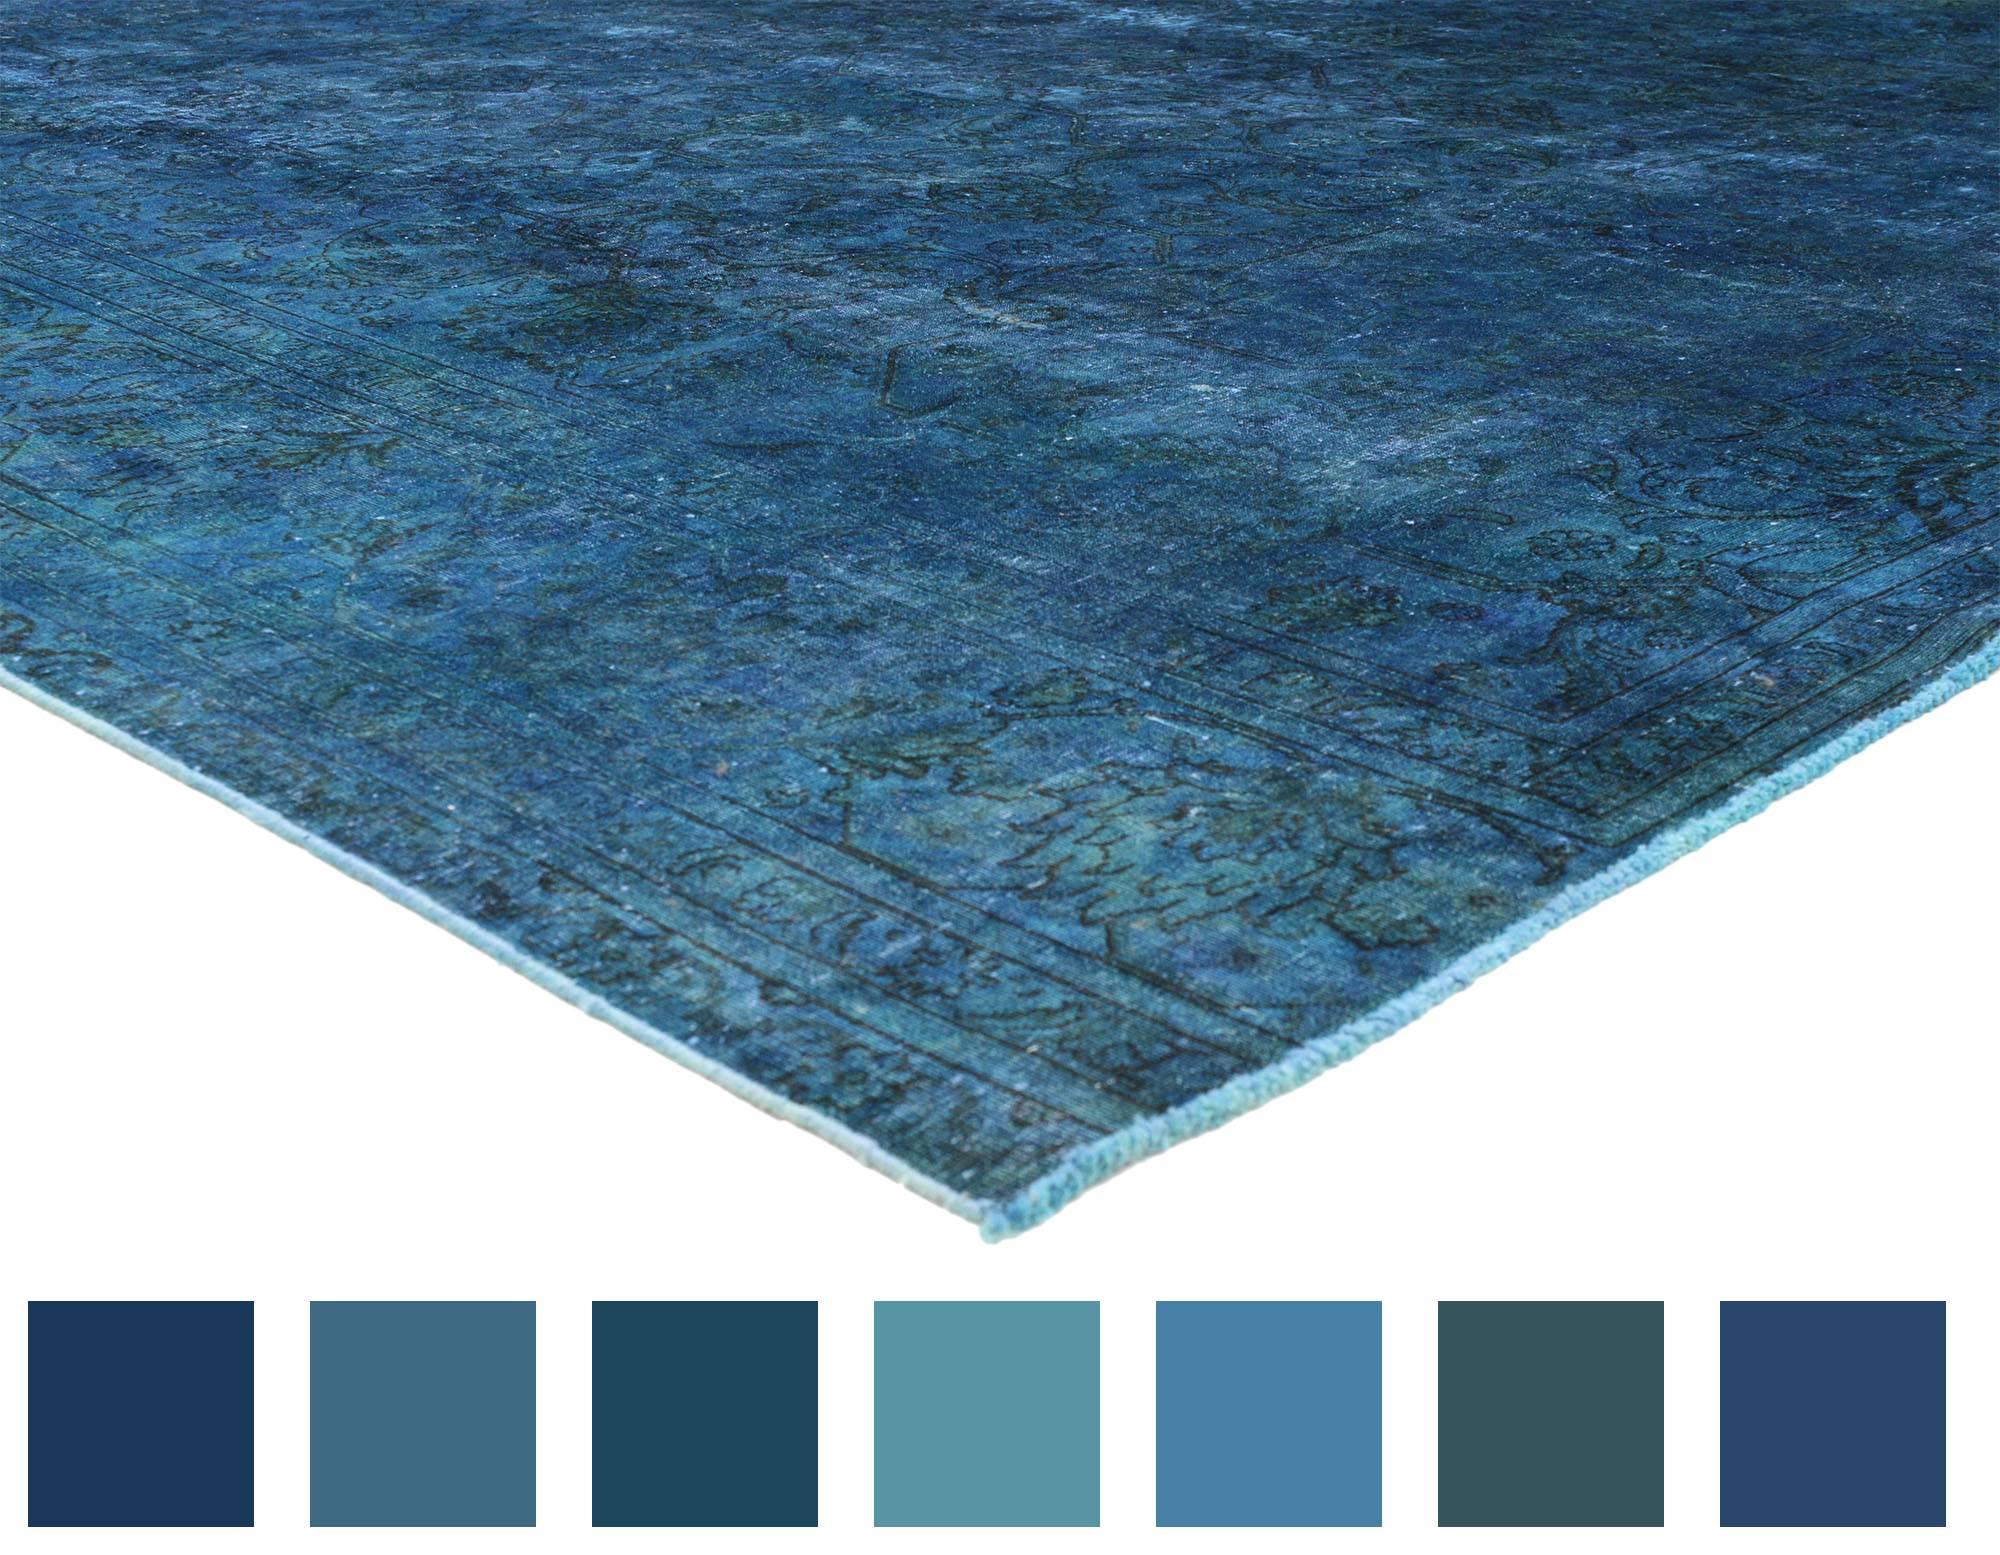 80425 Distressed Vintage Overdyed Blue Persian Square Rug with Luxe Mediterranean Style. Luxe Mediterranean style meets elegant simplicity in this hand-knotted wool distressed vintage overdyed blue Persian rug. The field is covered in an all-over